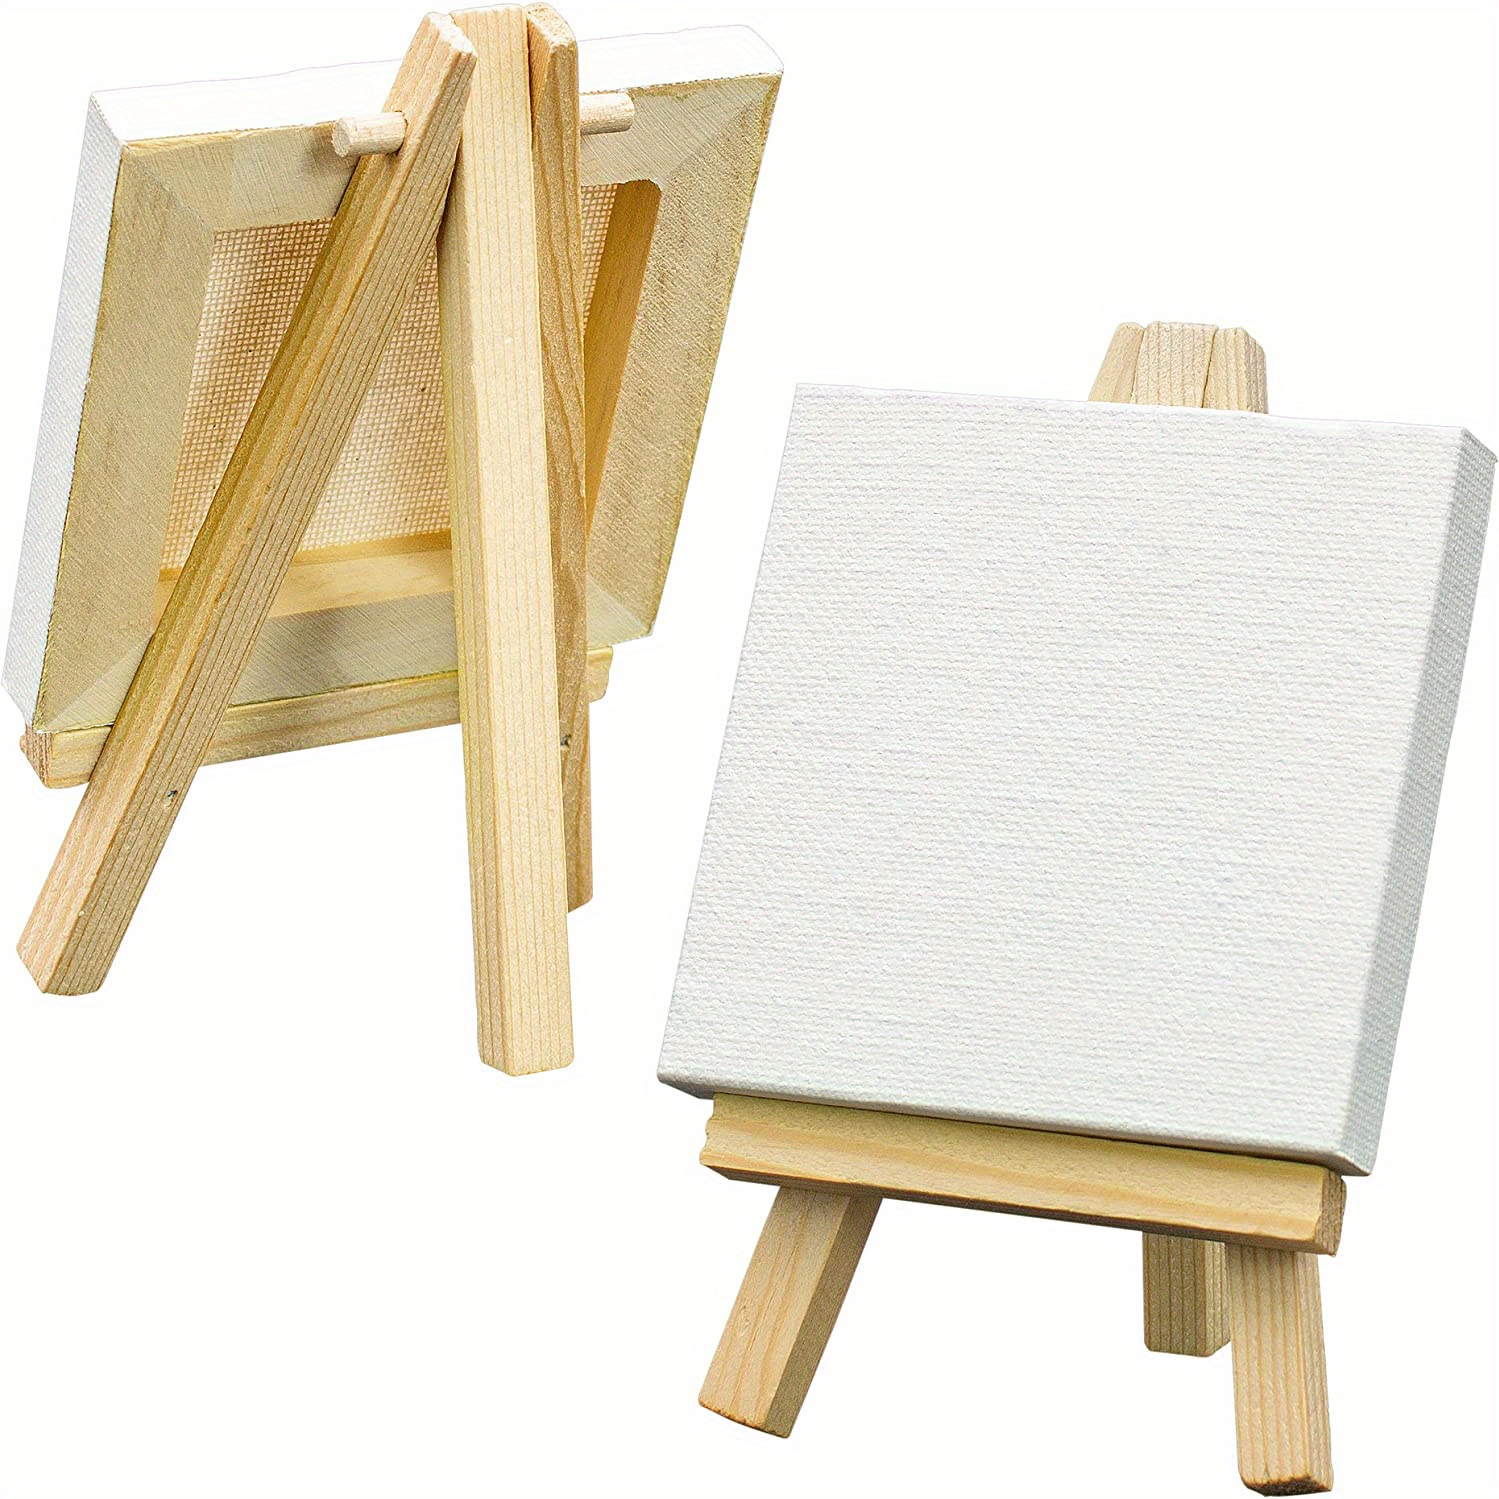 Parts3A 3 PCS Wooden Easels, 16 and 9 Easel for Oman